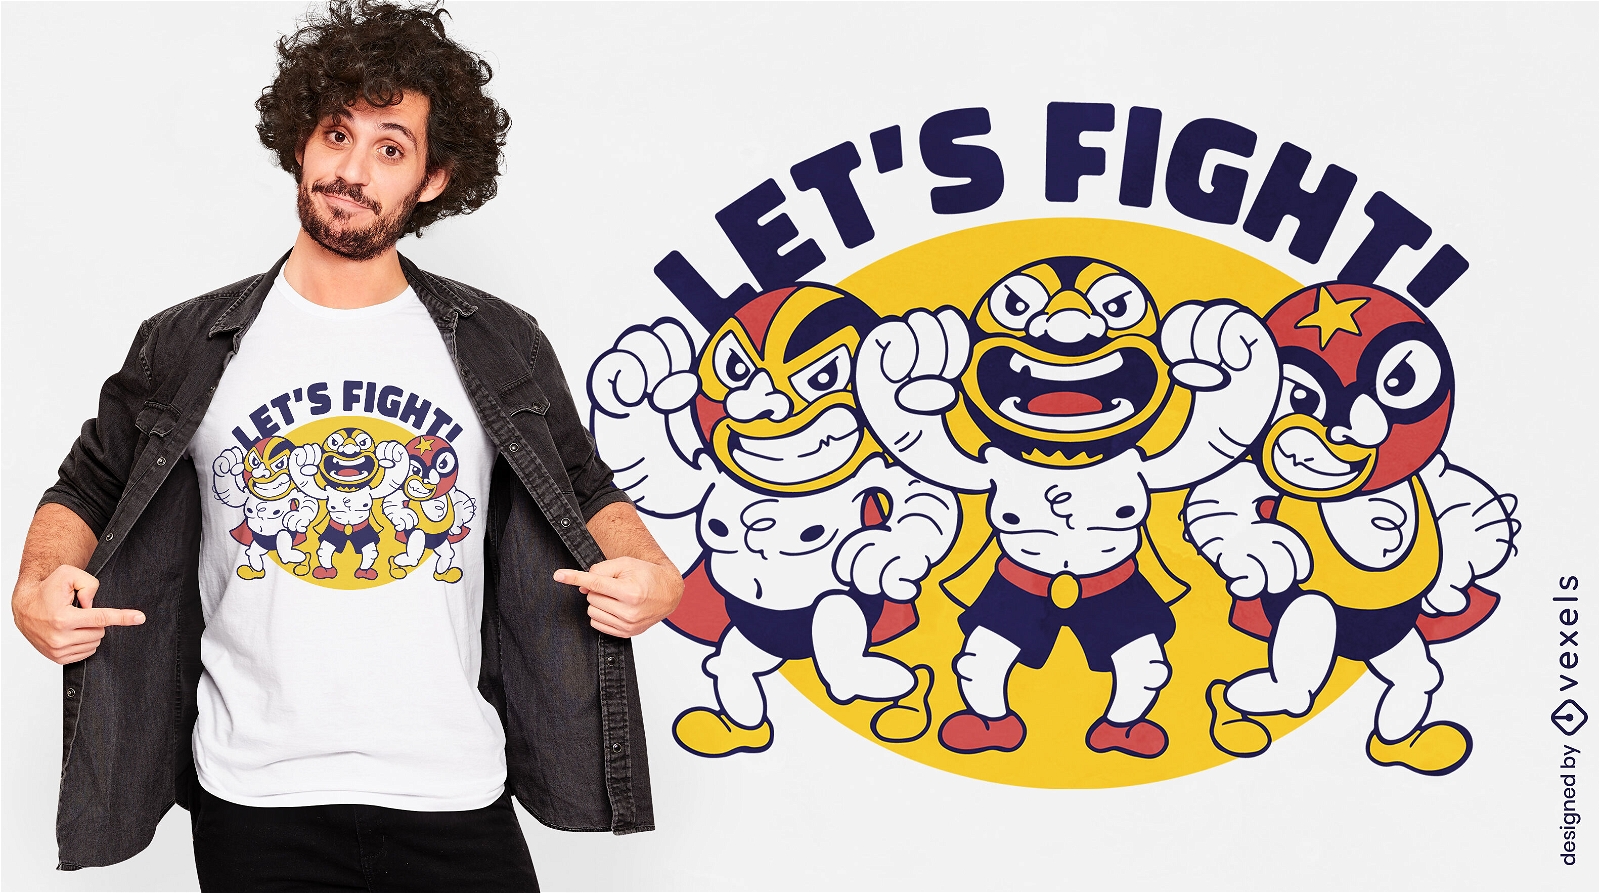 Funny cartoon Mexican fighters t-shirt design